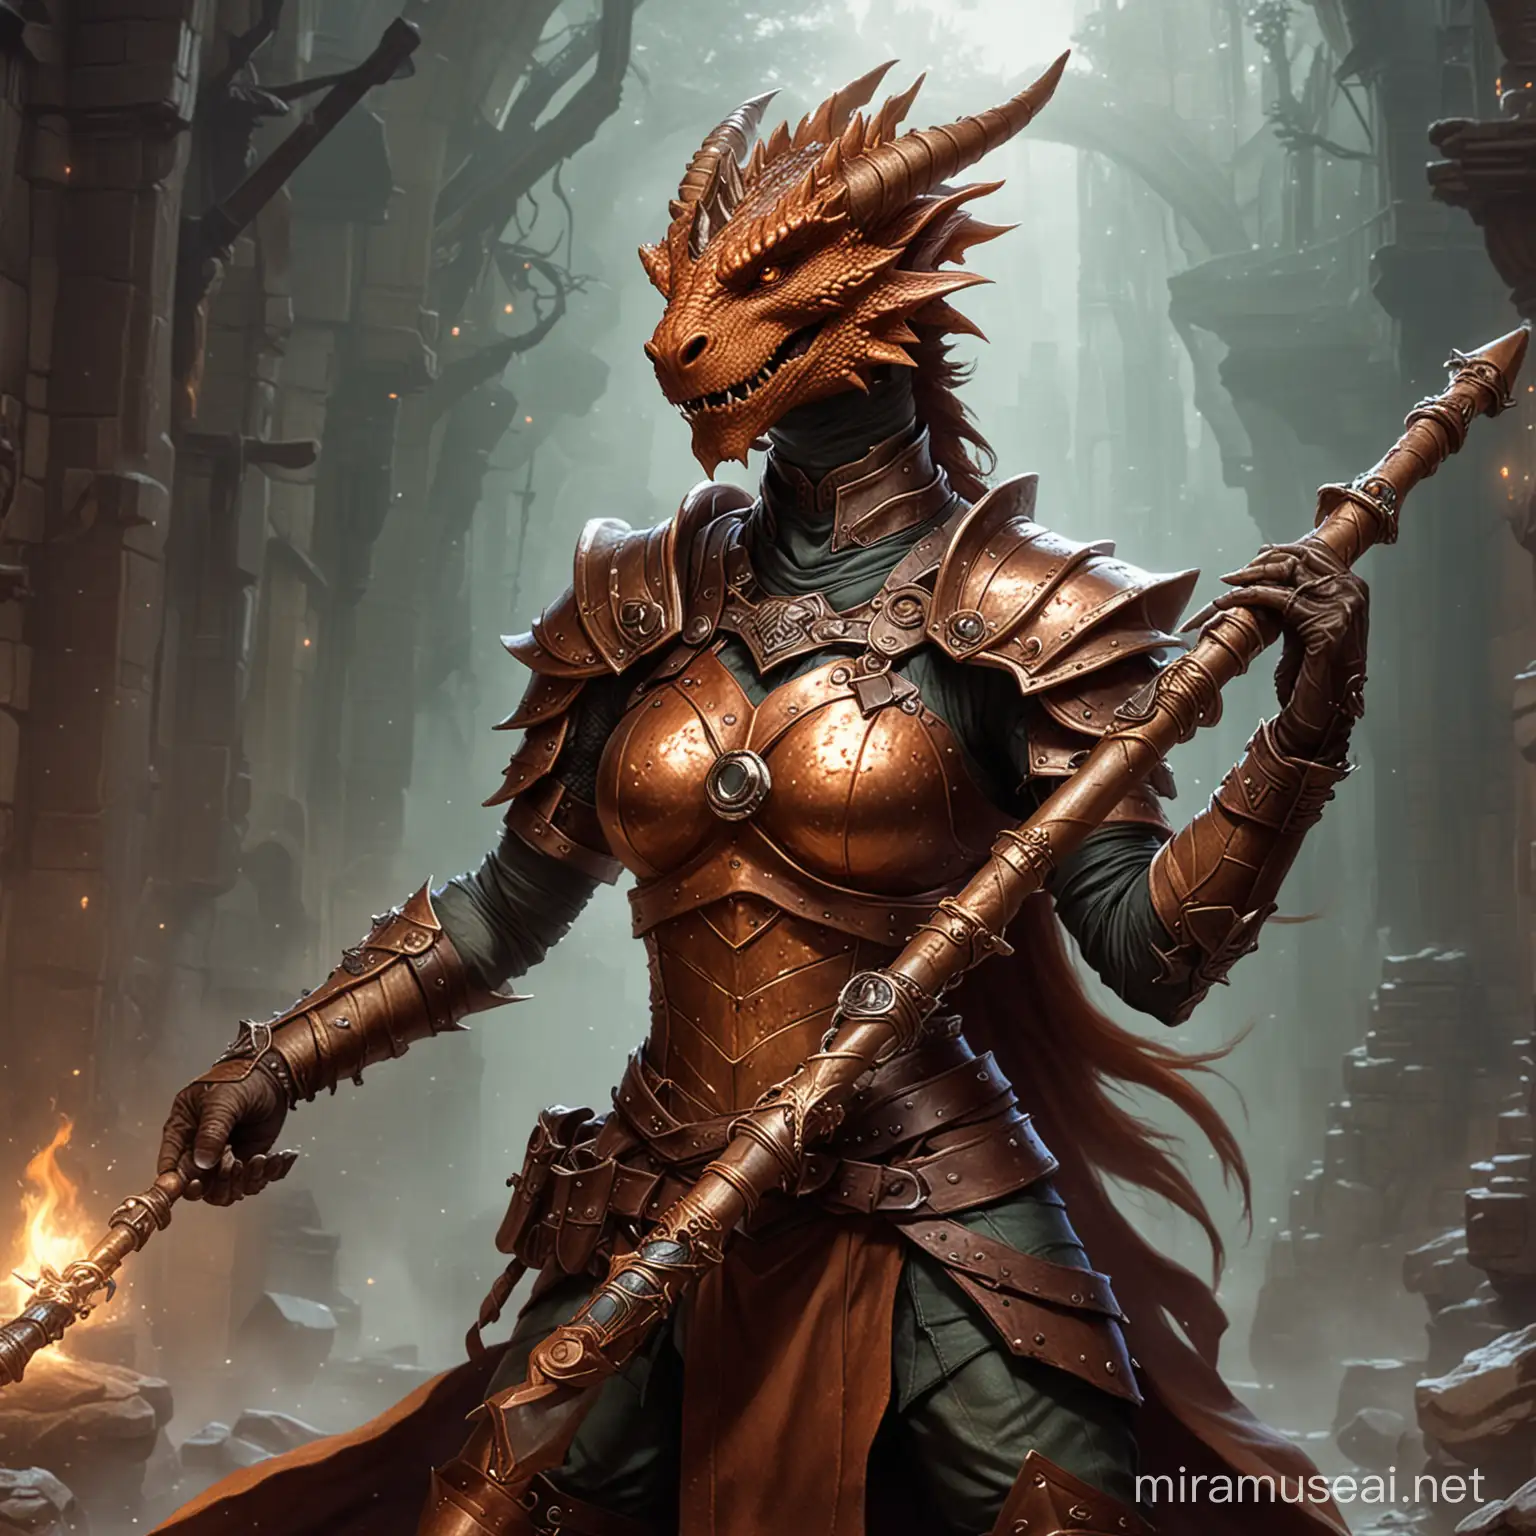 copper dragonborn from dungeons and dragons, bard, female, flute
